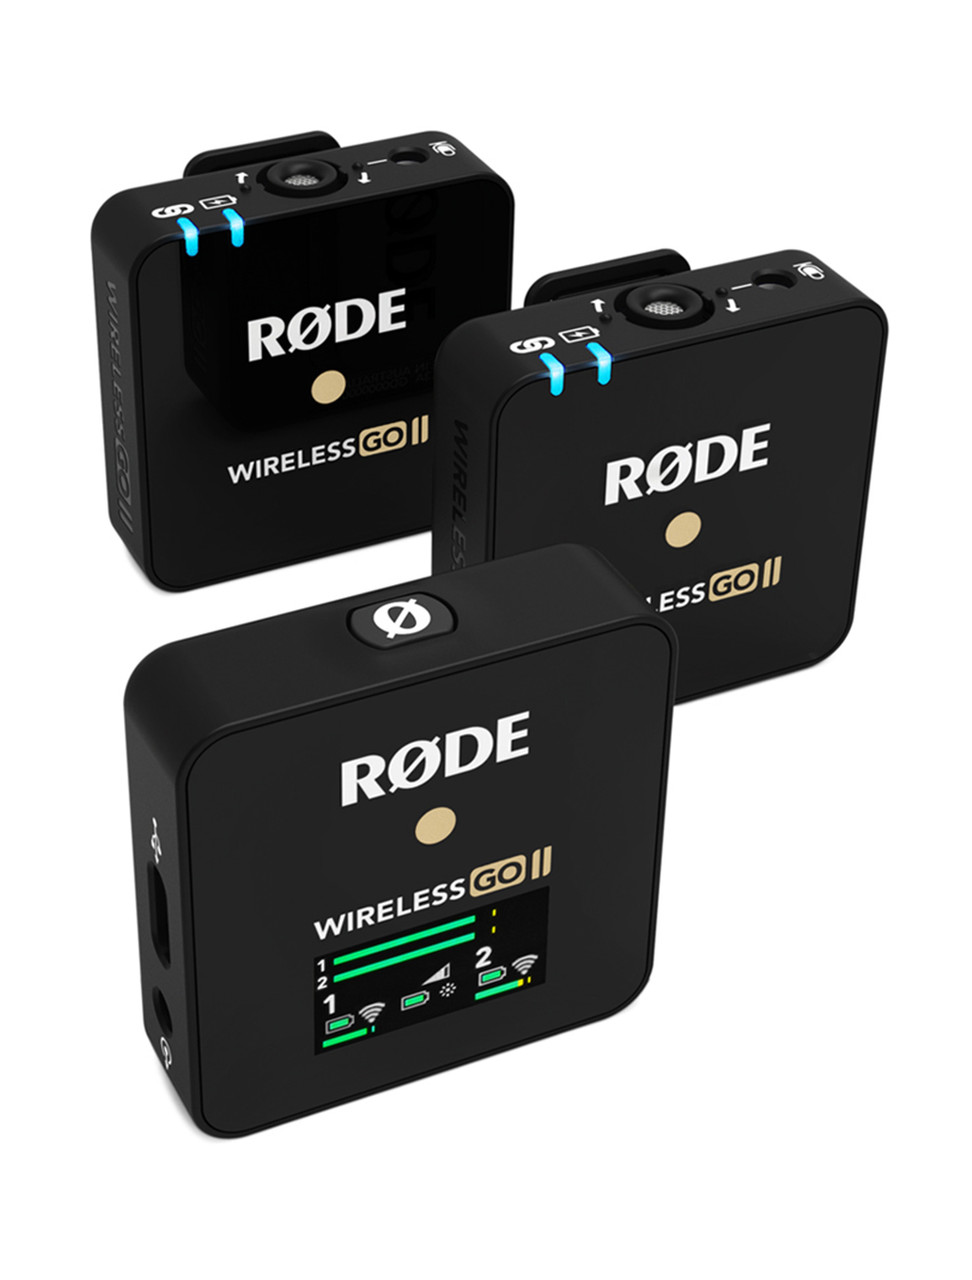 RØDE Wireless GO II Single Ultra-compact Dual-channel Wireless Microphone  System with a Built-in Microphone and On-board Recording for Filmmaking